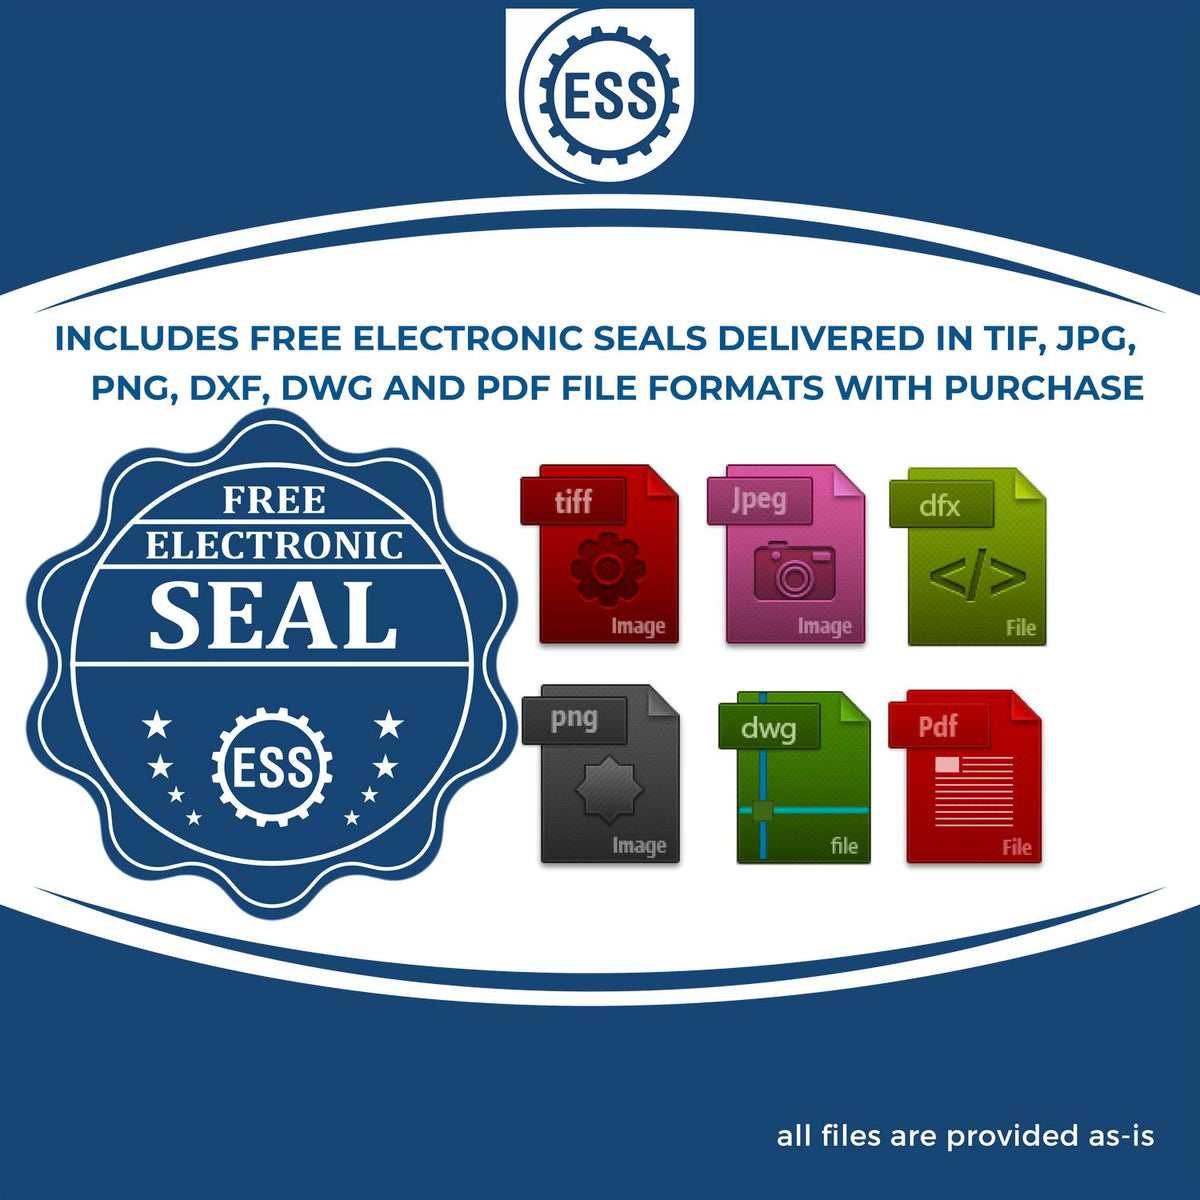 An infographic for the free electronic seal for the Slim Pre-Inked North Carolina Landscape Architect Seal Stamp illustrating the different file type icons such as DXF, DWG, TIF, JPG and PNG.